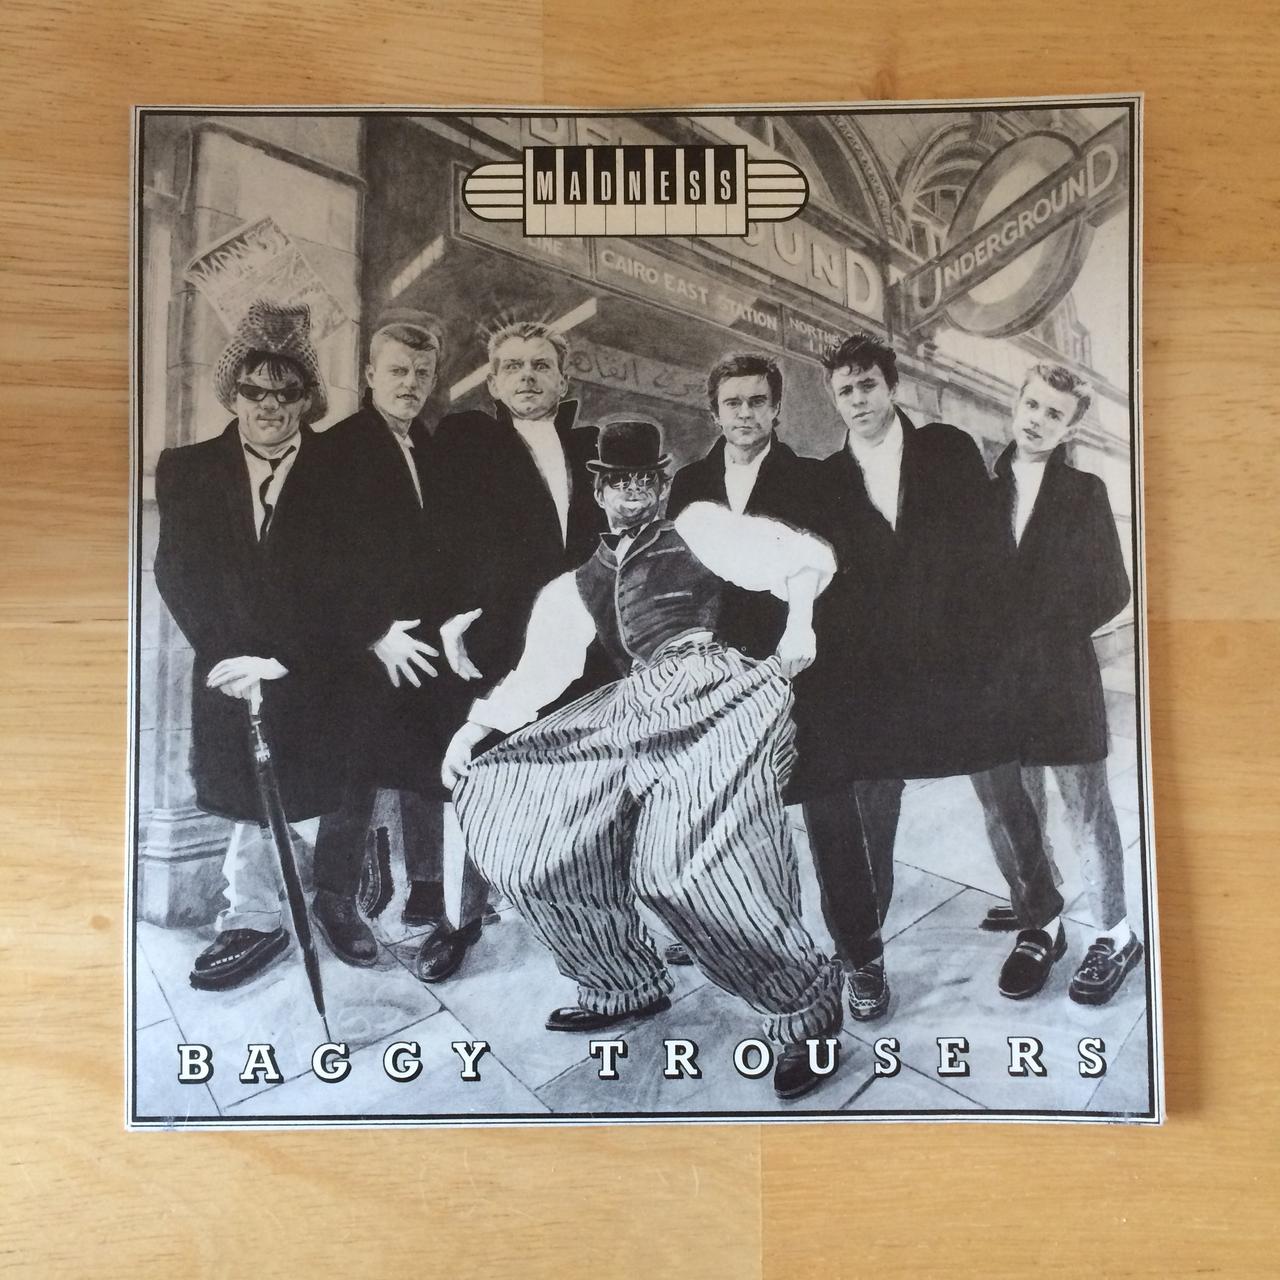 Madness - Baggy Trousers from 1980. “Baggy Trousers